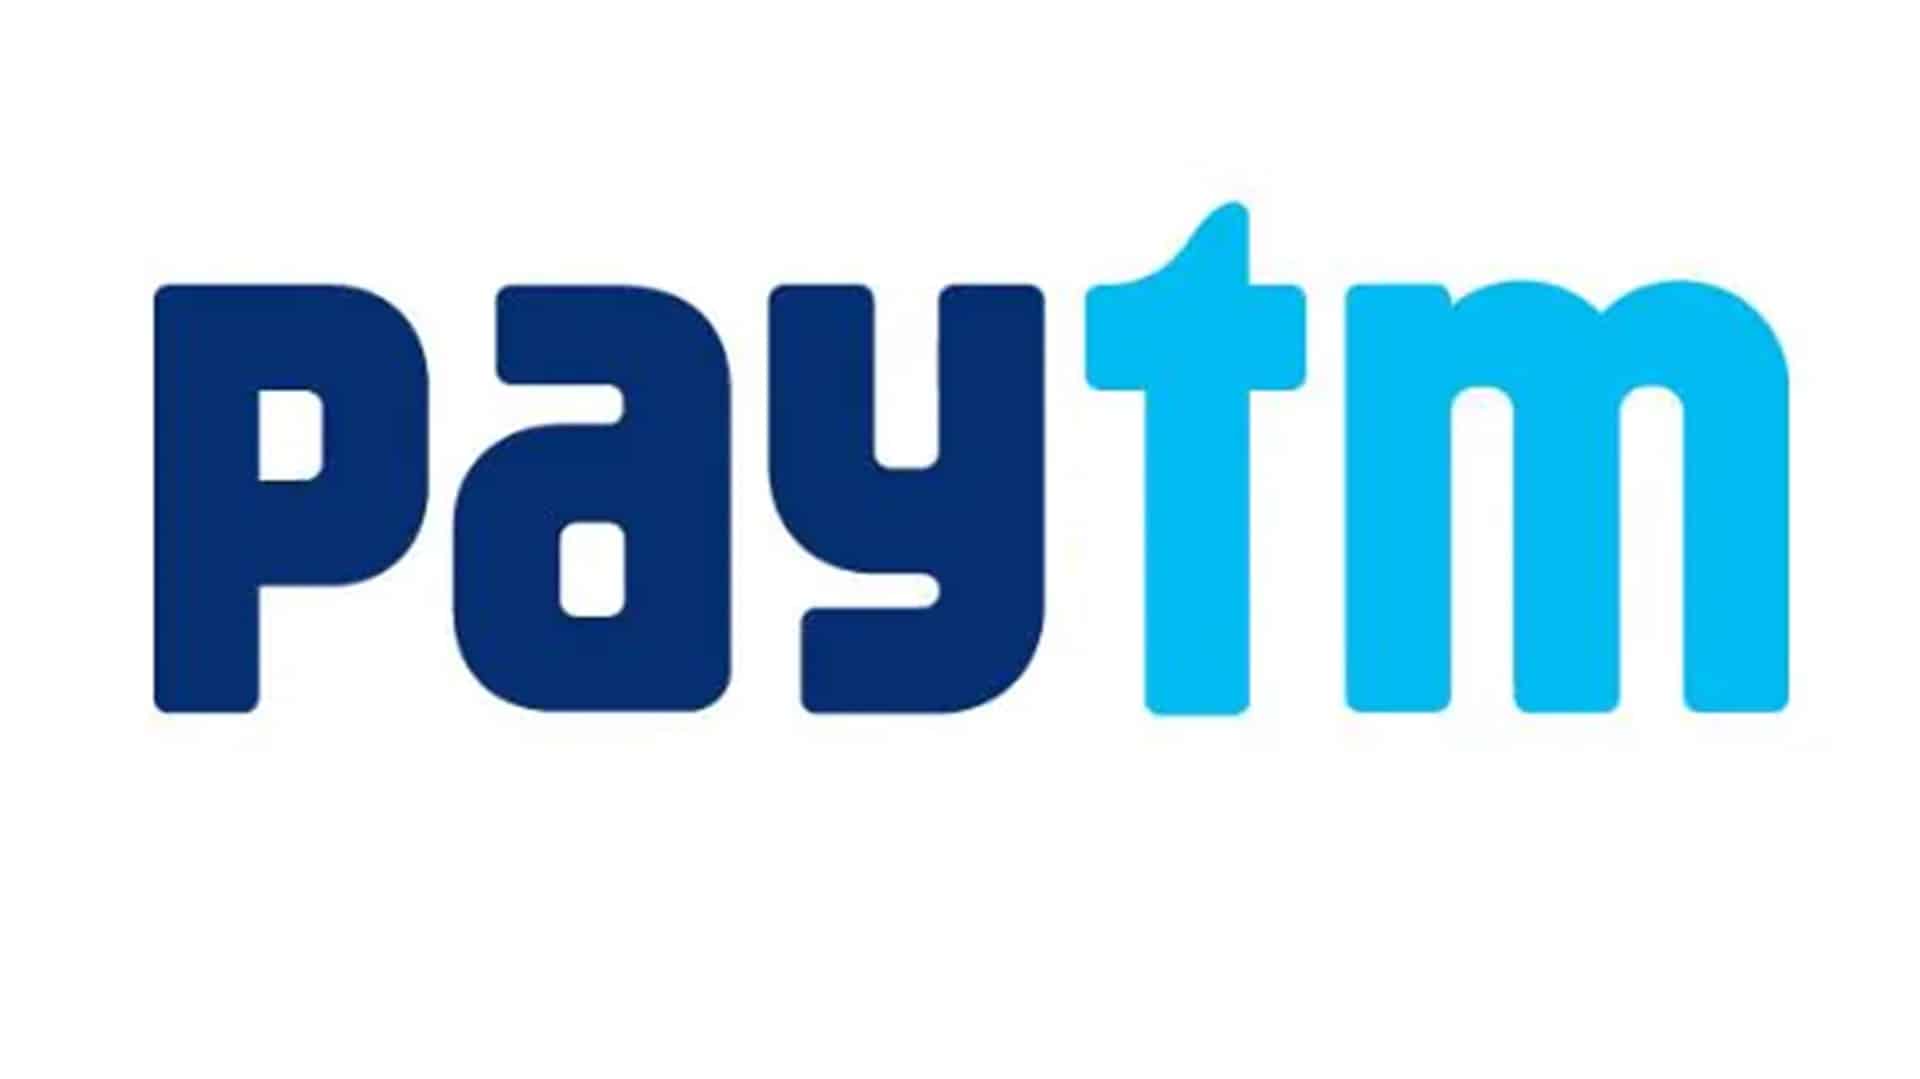 RBI bars Paytm Payments Bank from onboarding new customers